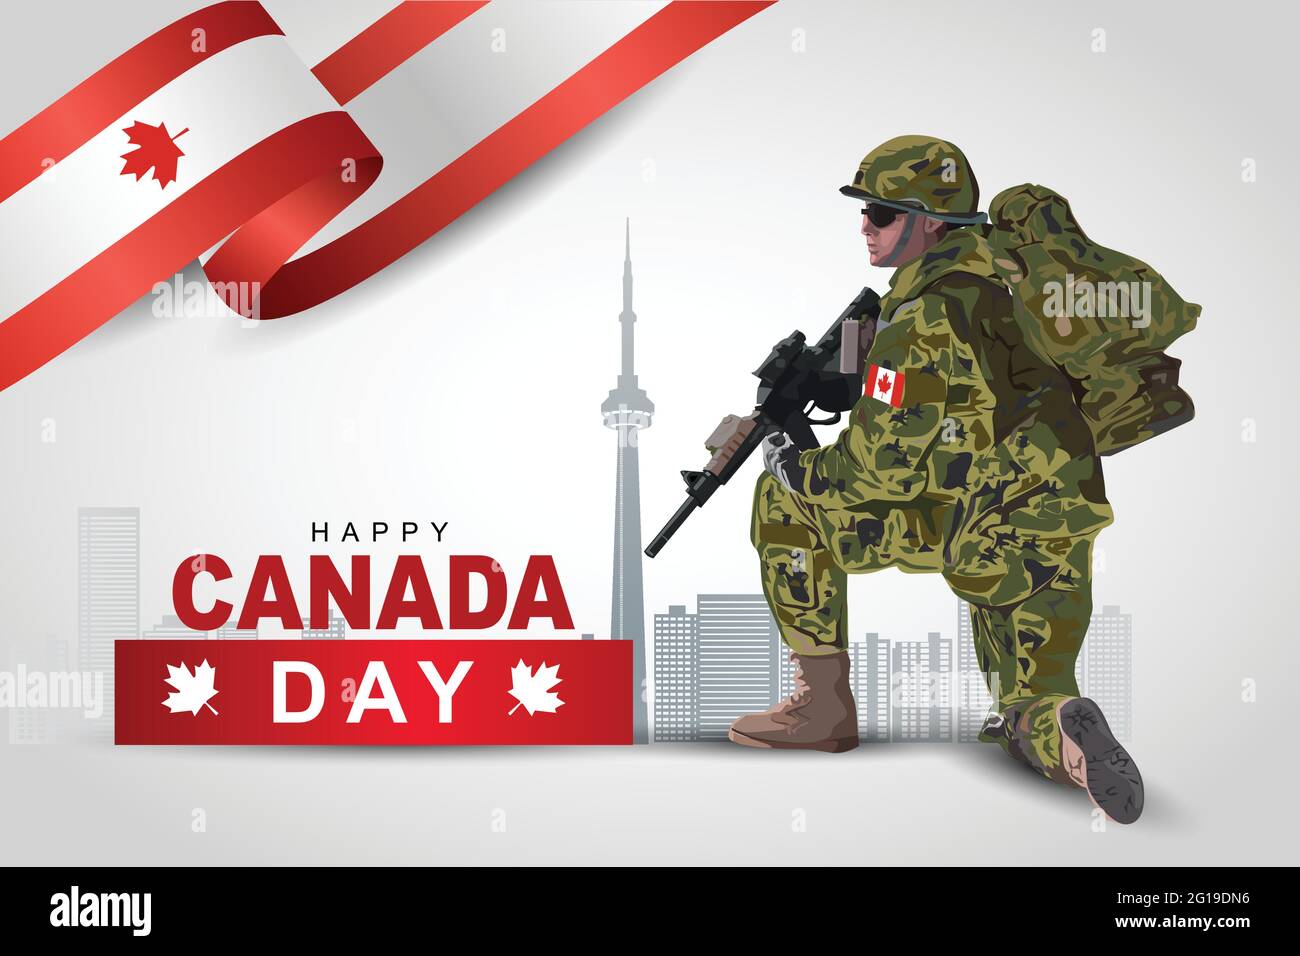 illustration of 1st of July background for Happy Canada day. a soldier with gun and flag. Vector illustration design. Stock Vector